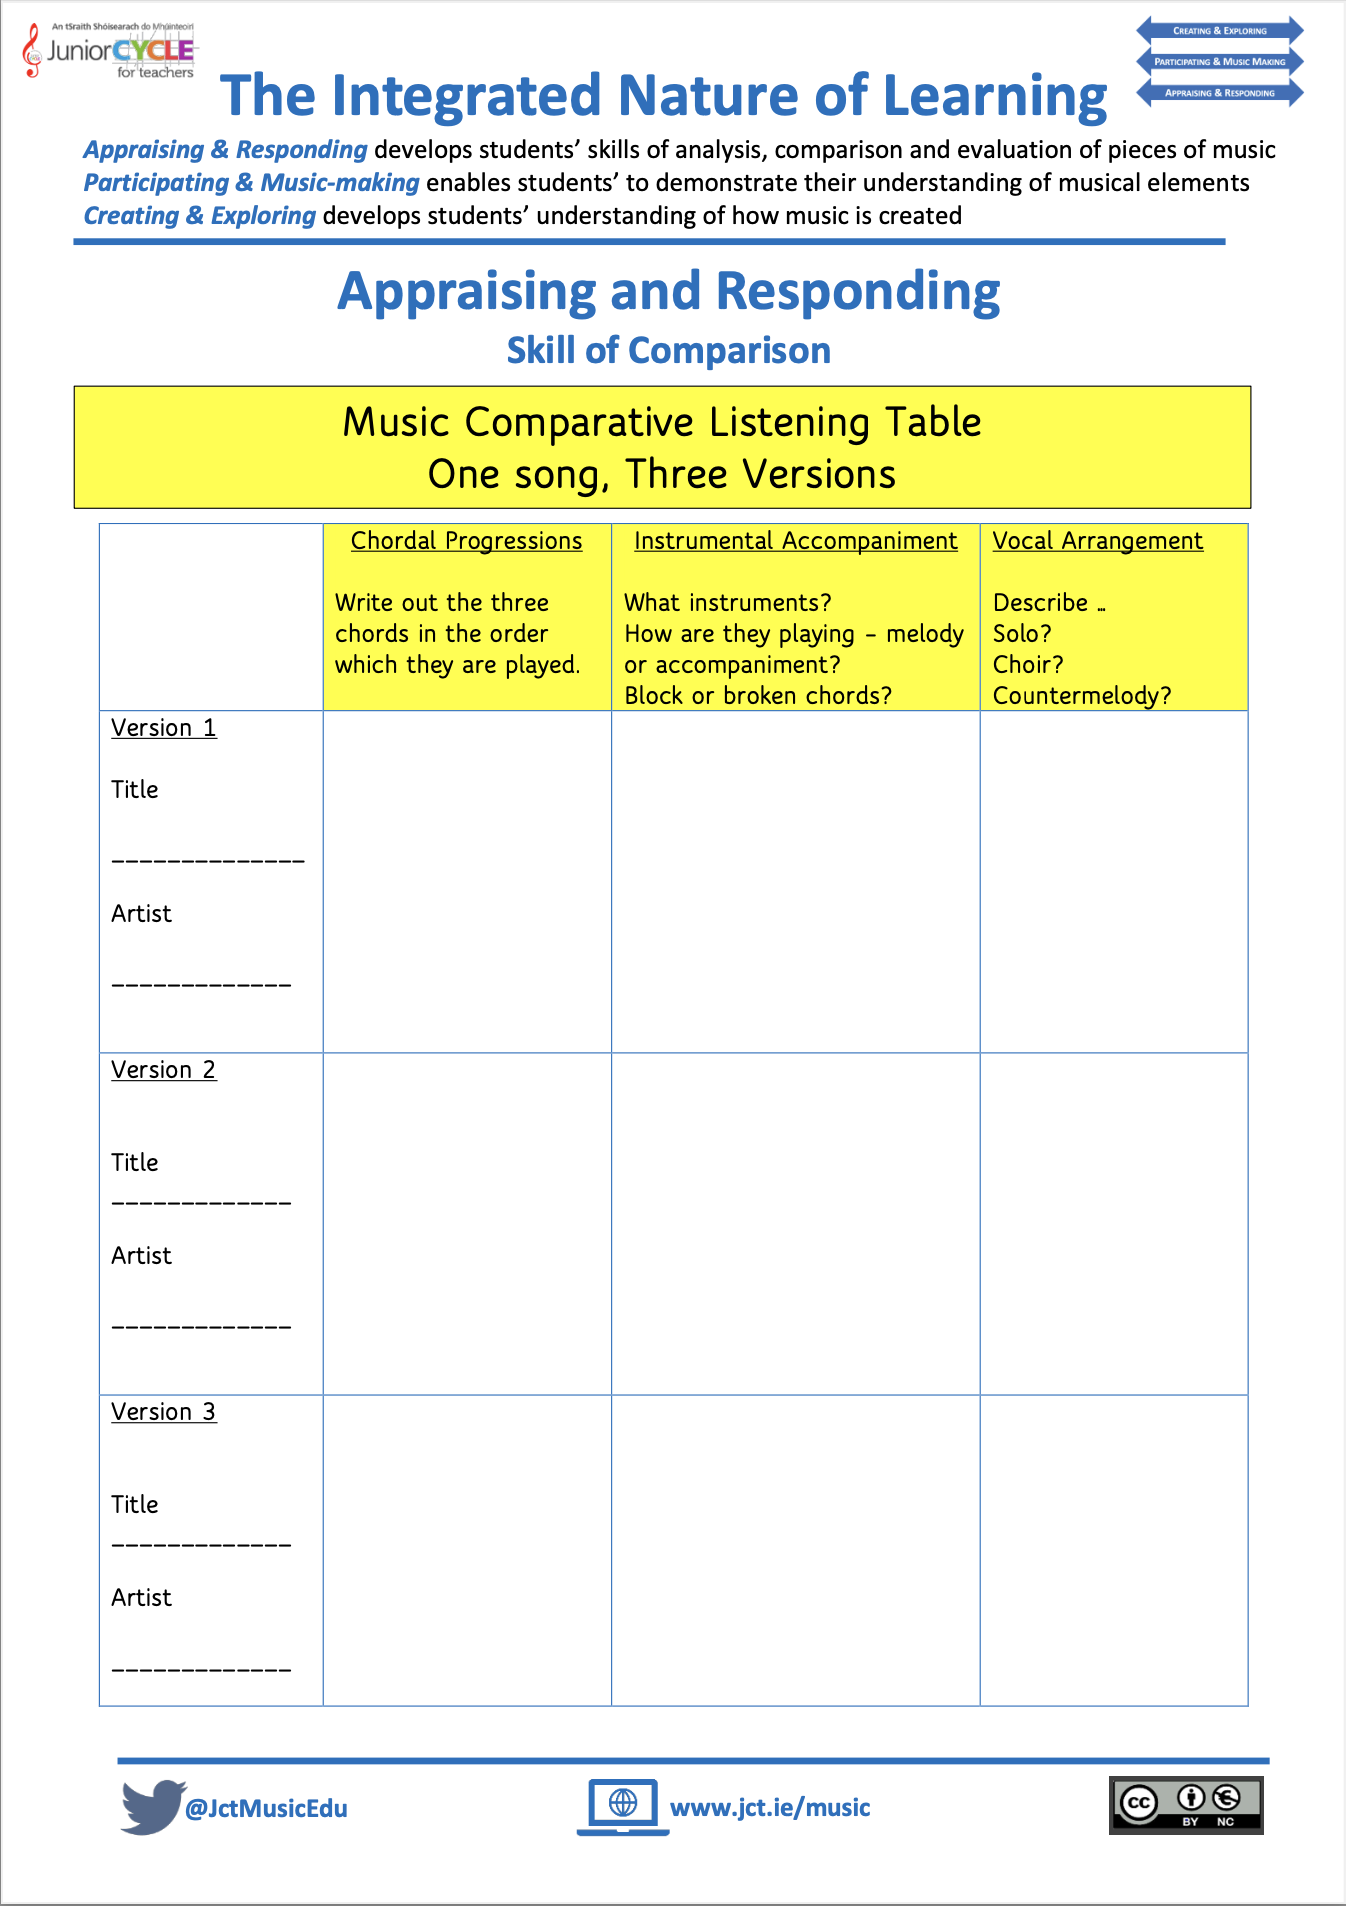 The Integrated Nature of Learning: Appraising and Responding (Skill of Comparison)